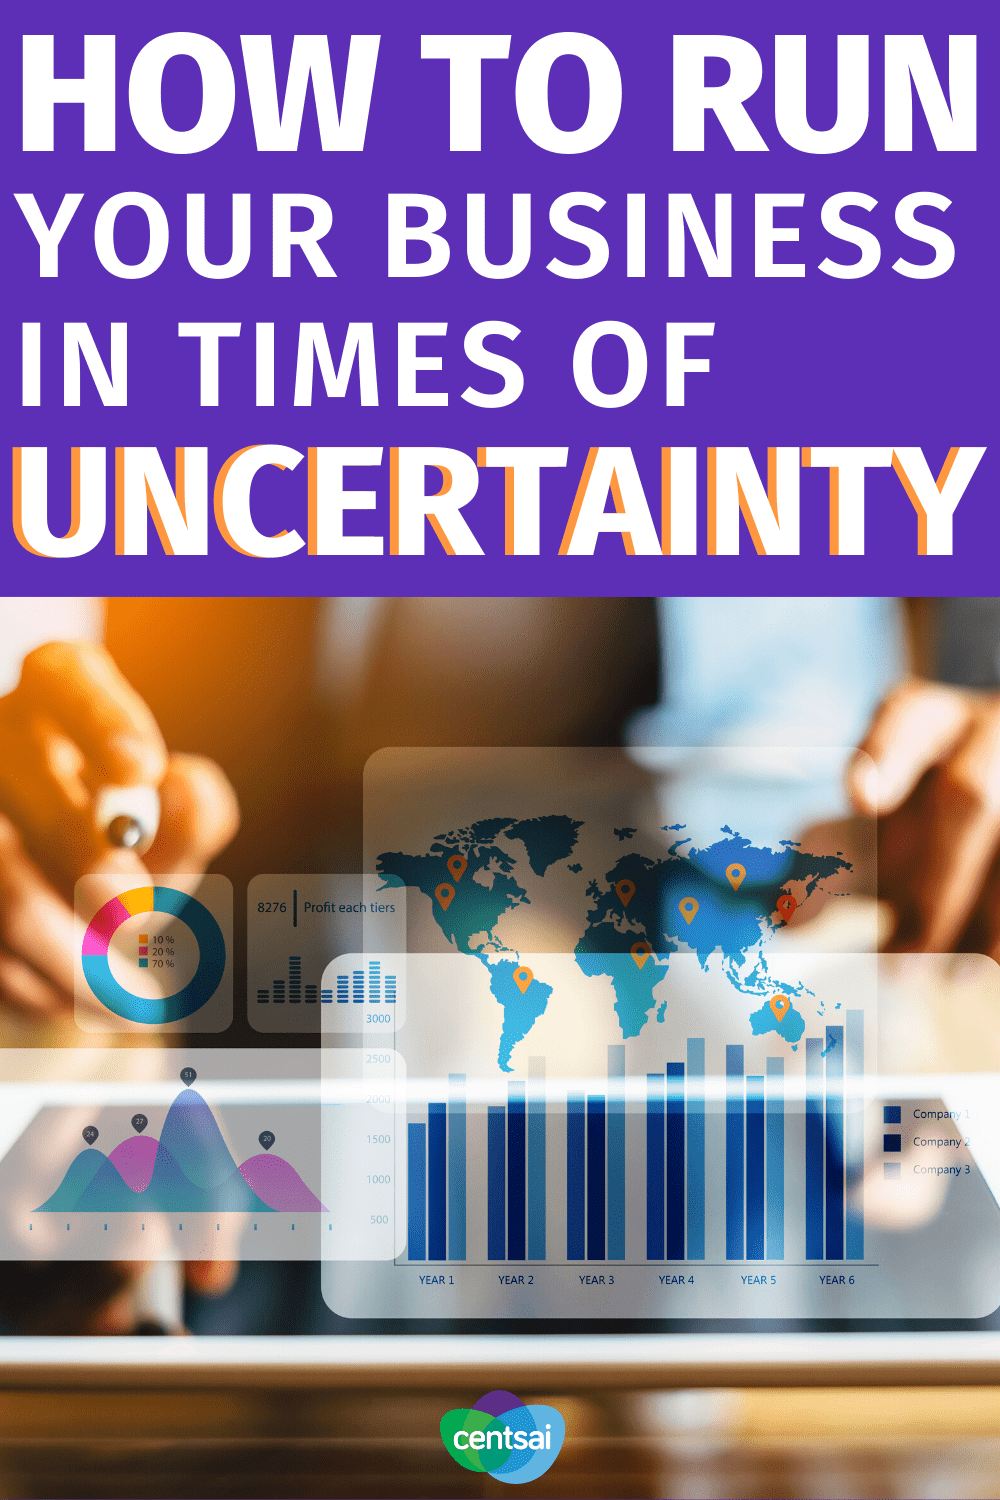 How to Run Your Business in Times of Uncertainty